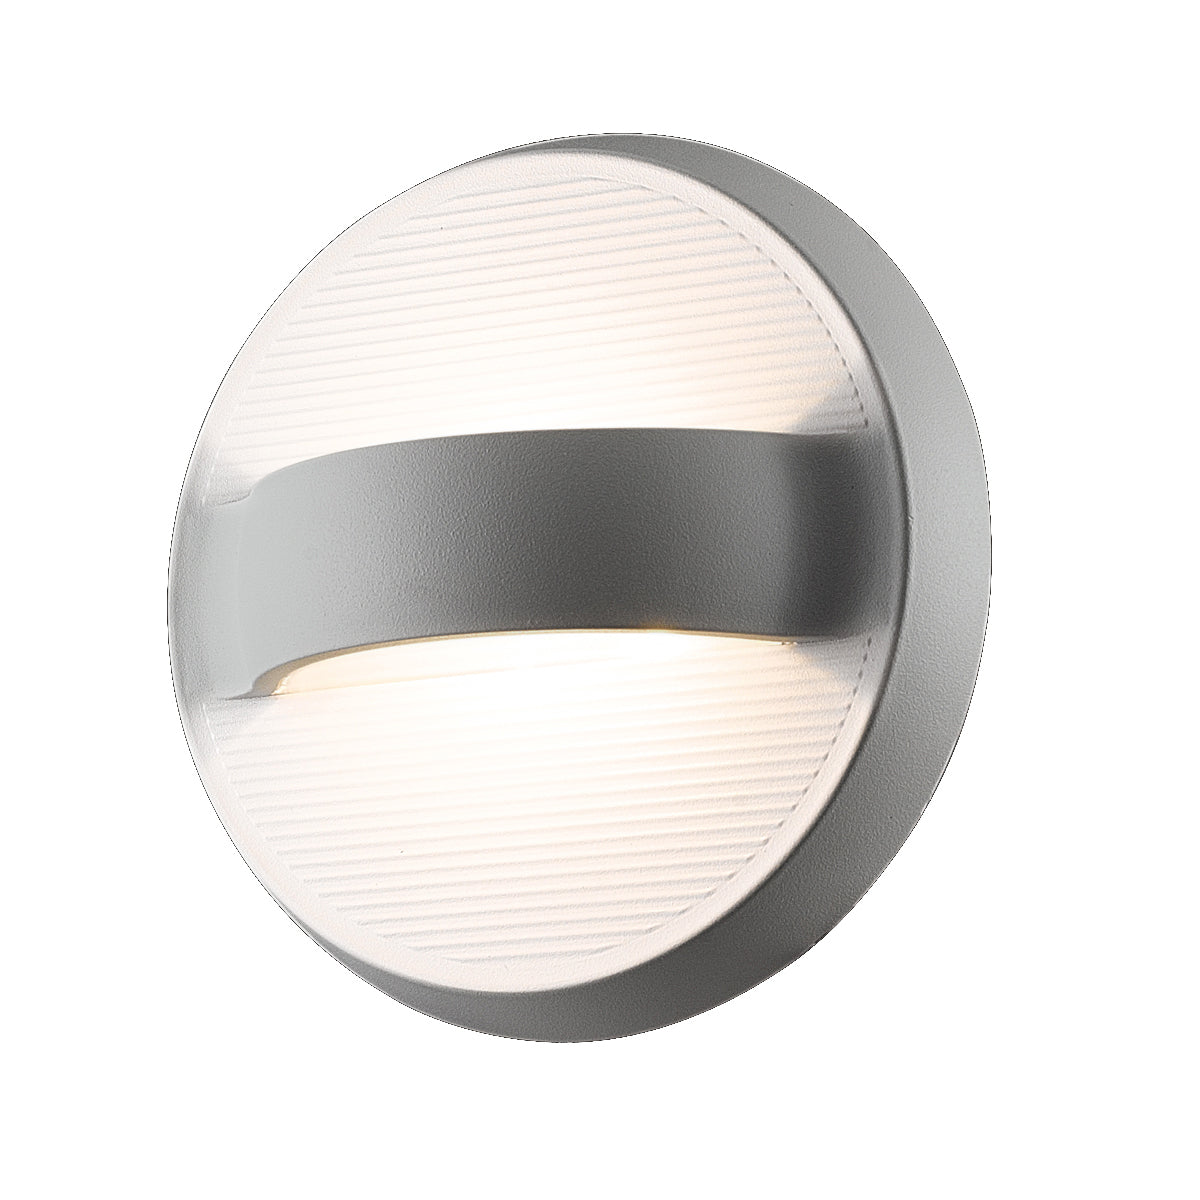 BAY Outdoor sconce Aluminum - 28274-018 INTEGRATED LED | EUROFASE